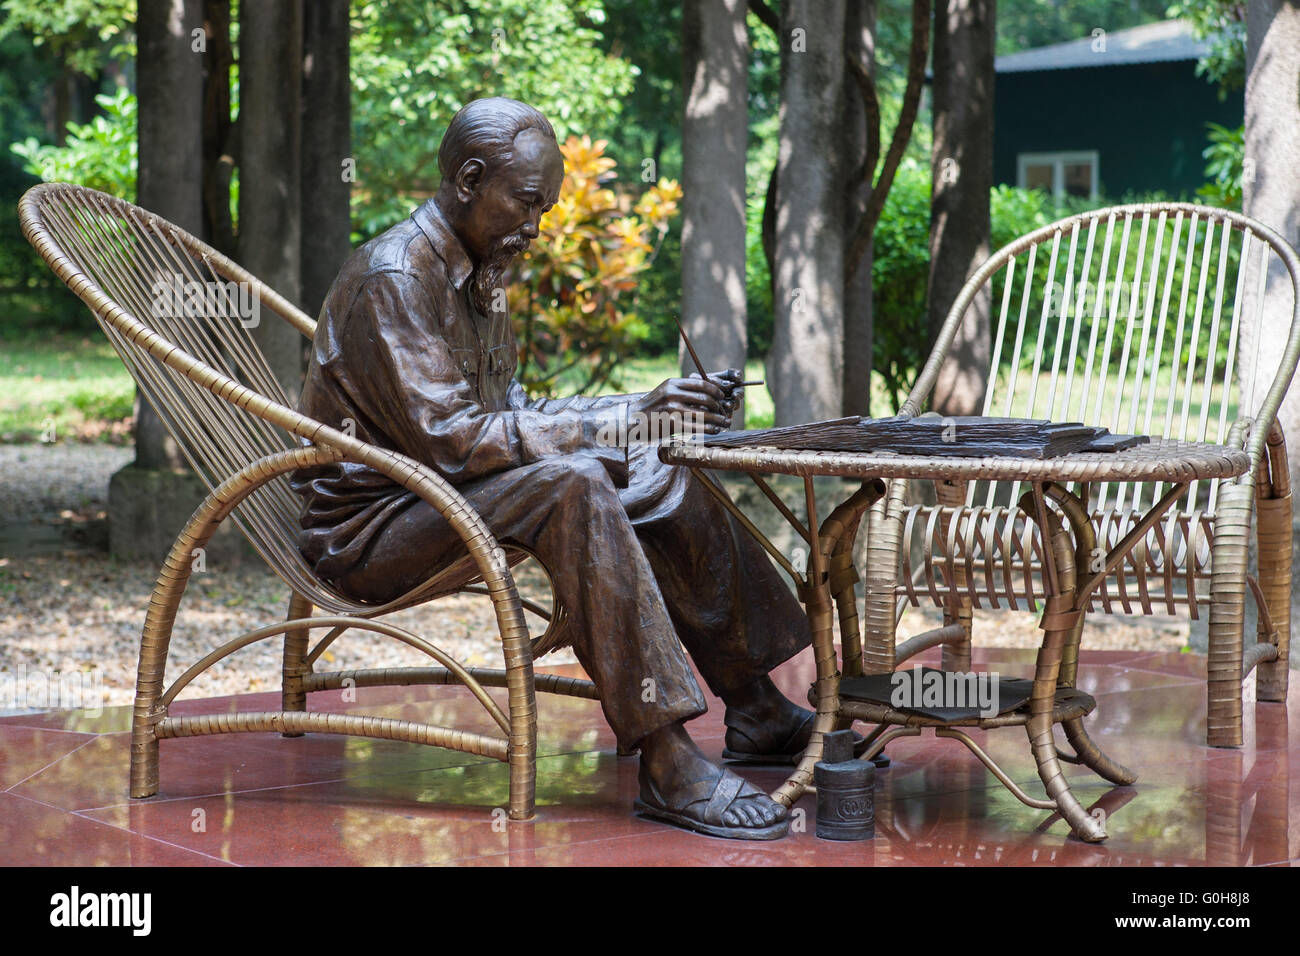 Informal statue of Ho Chi Minh in the gardens of the Presidential Palace, Hanoi, Viet Nam Stock Photo